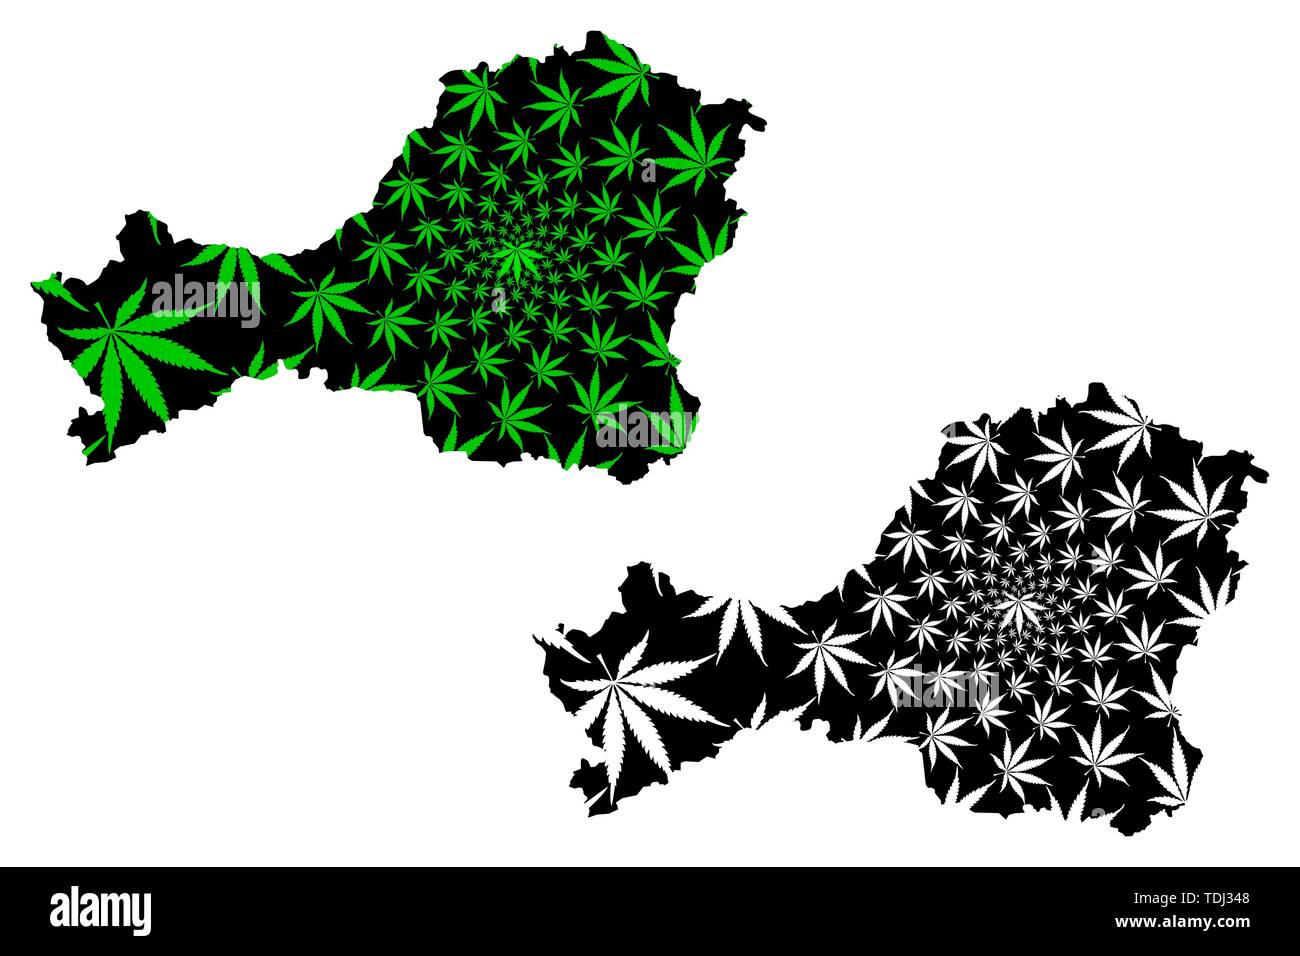 Tuva (Russia, Subjects of the Russian Federation, Republics of Russia) map is designed cannabis leaf green and black, Tyva Republic map made of mariju Stock Vector